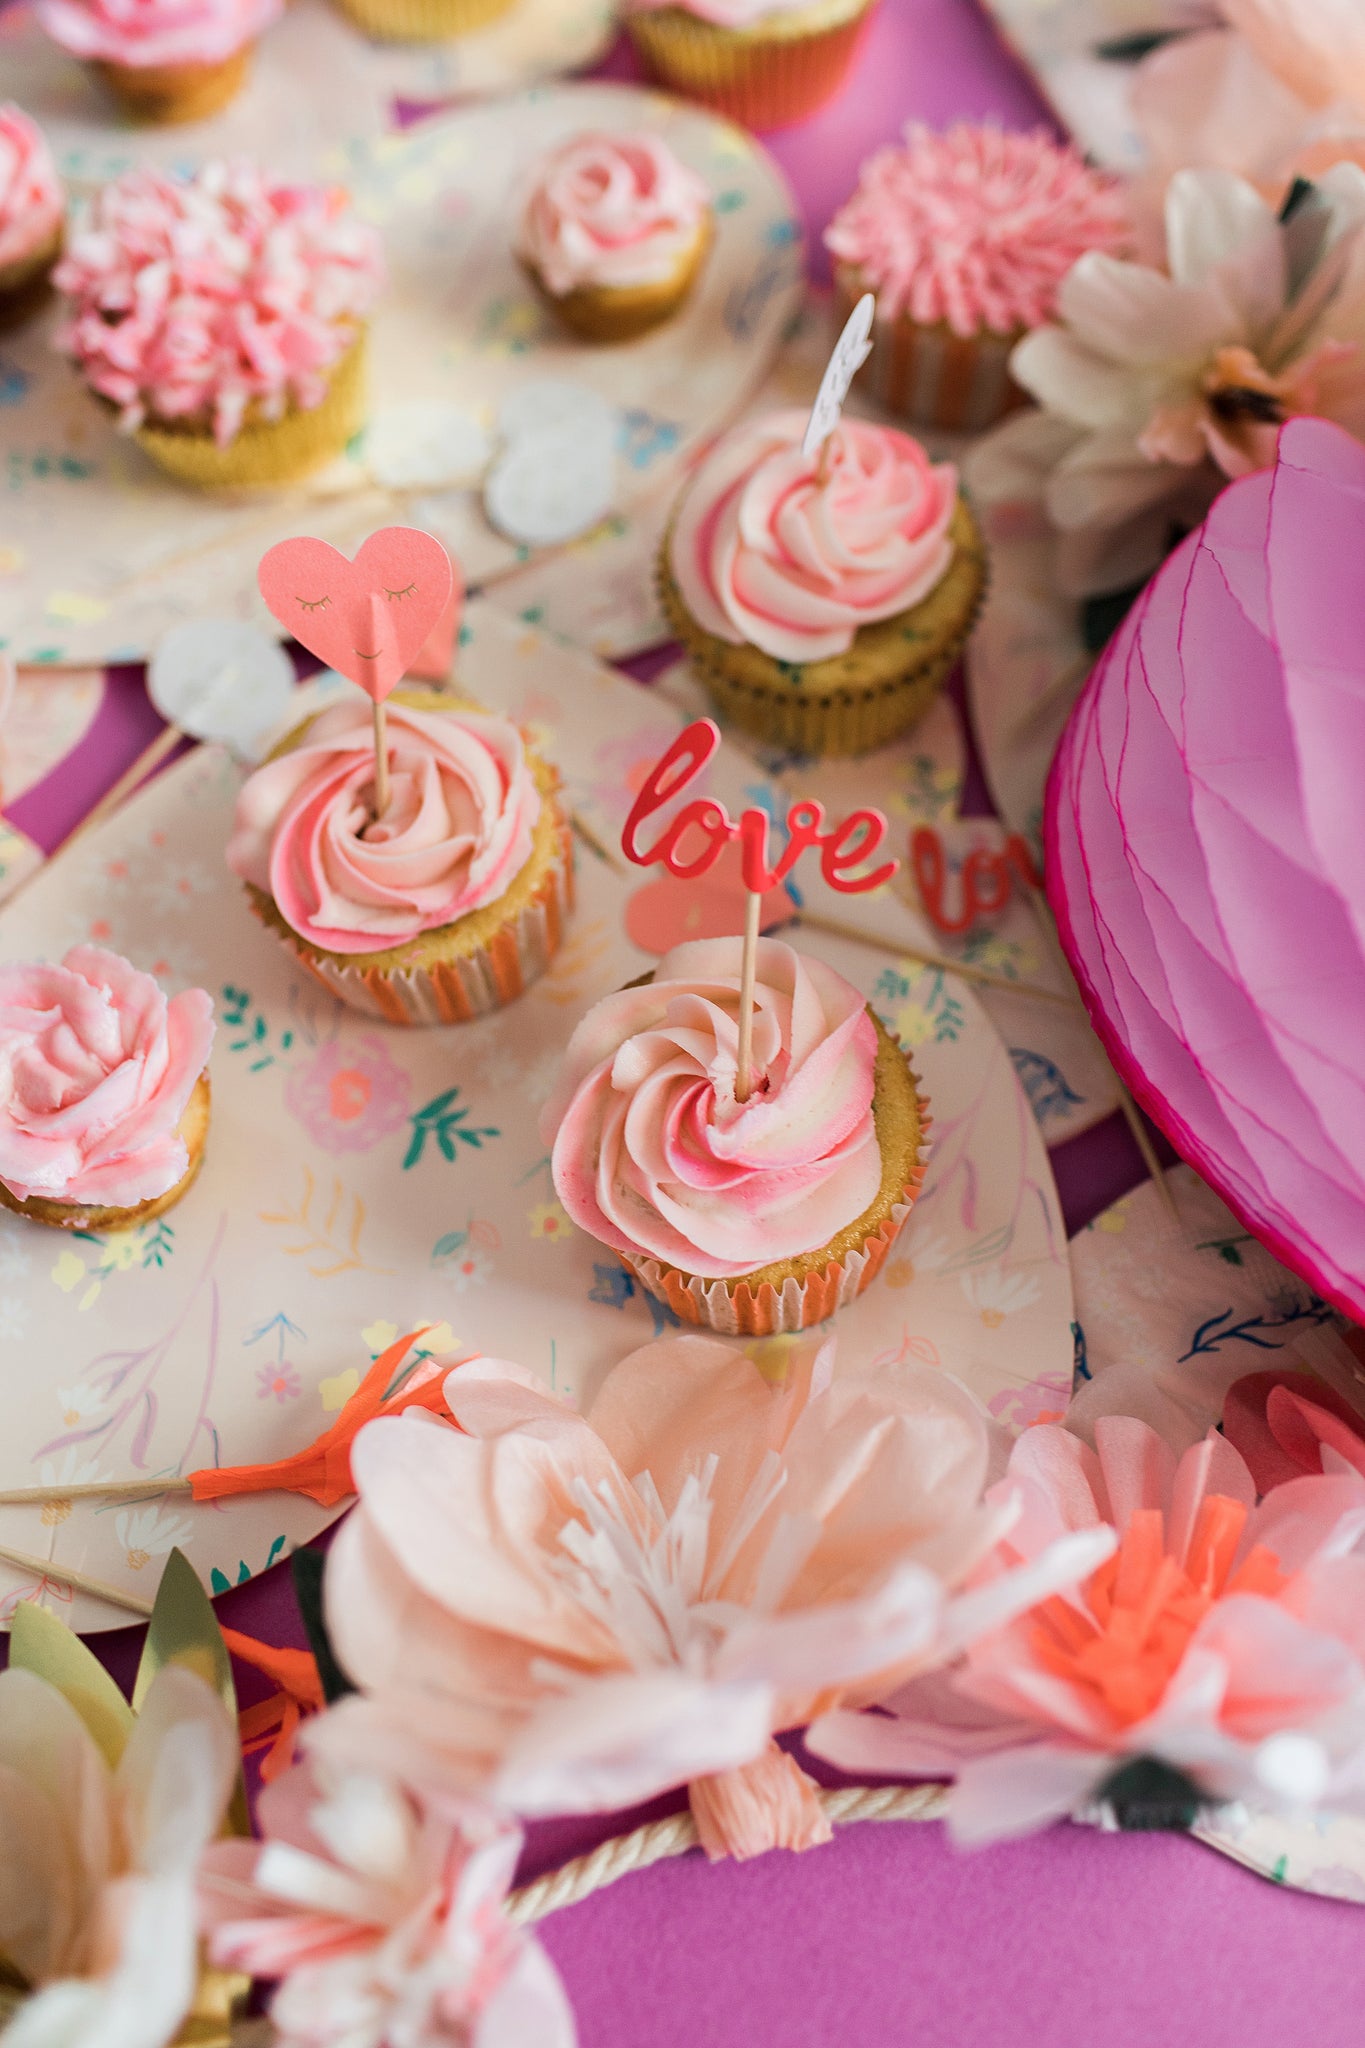 Pink Valentine's Day cupcakes with heart shaped toppers